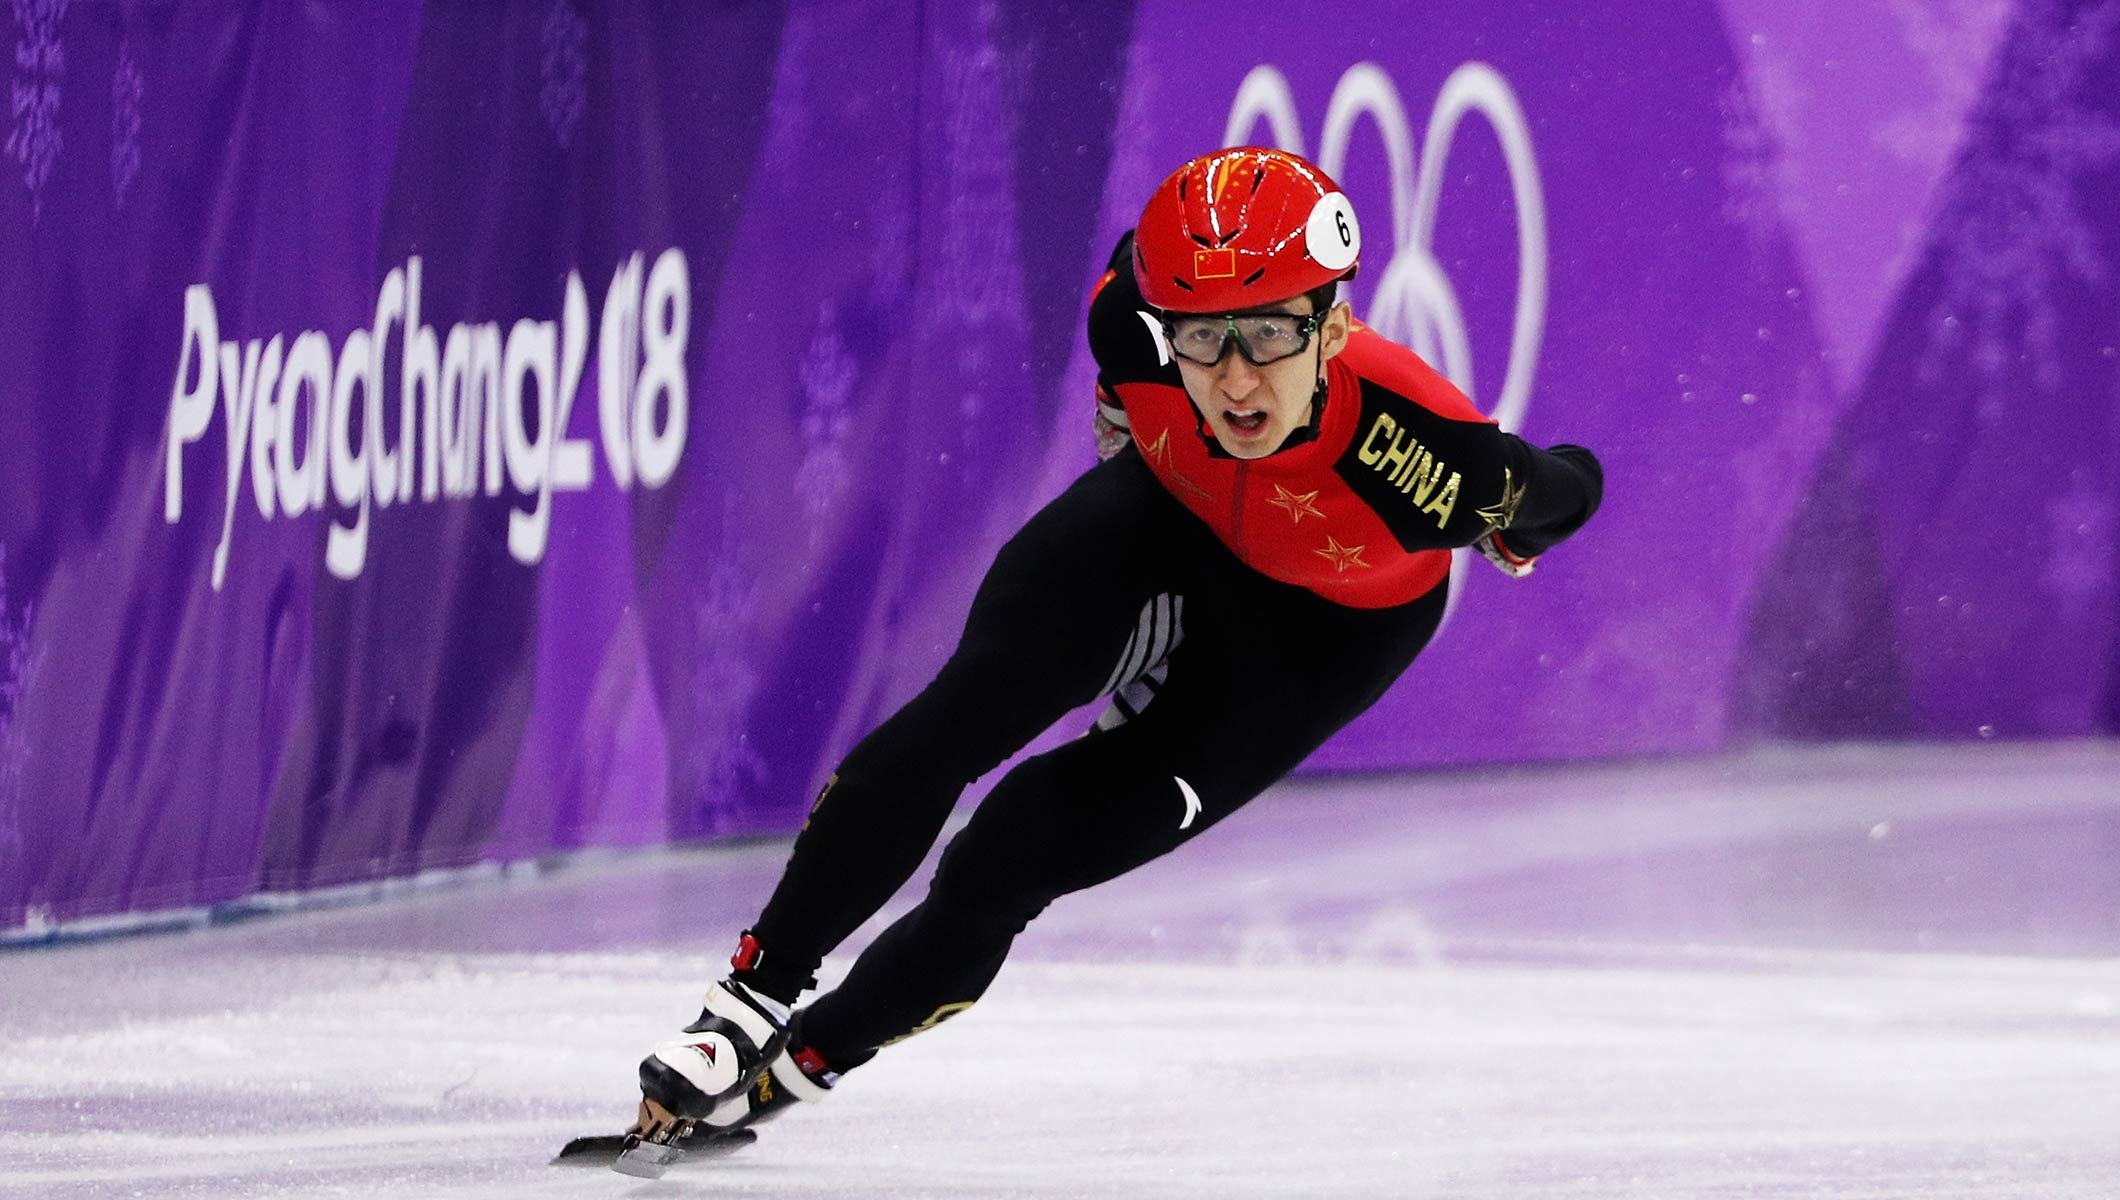 Olympic Figure Skaters Try The Short Track And Do a Big Tumble Instead